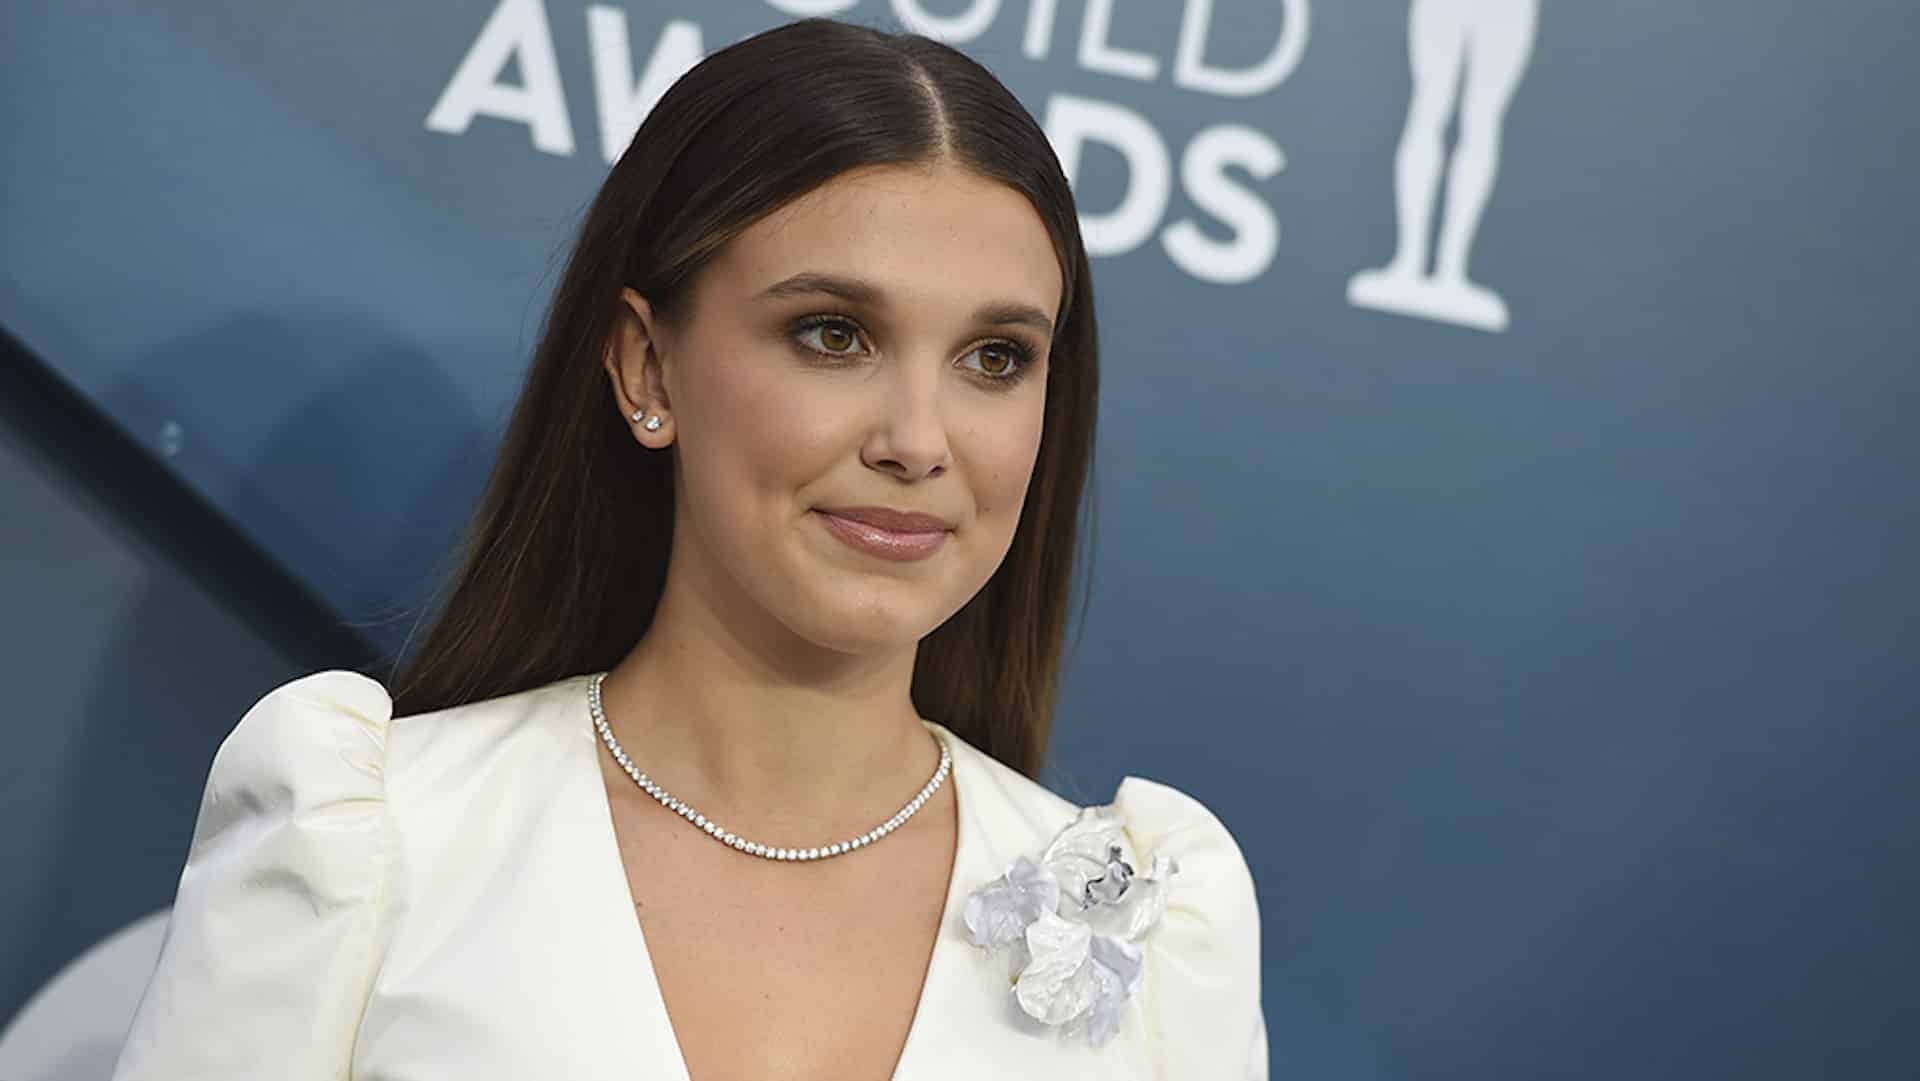 The Electric State: Millie Bobby Brown protagonista del film dei fratelli Russo